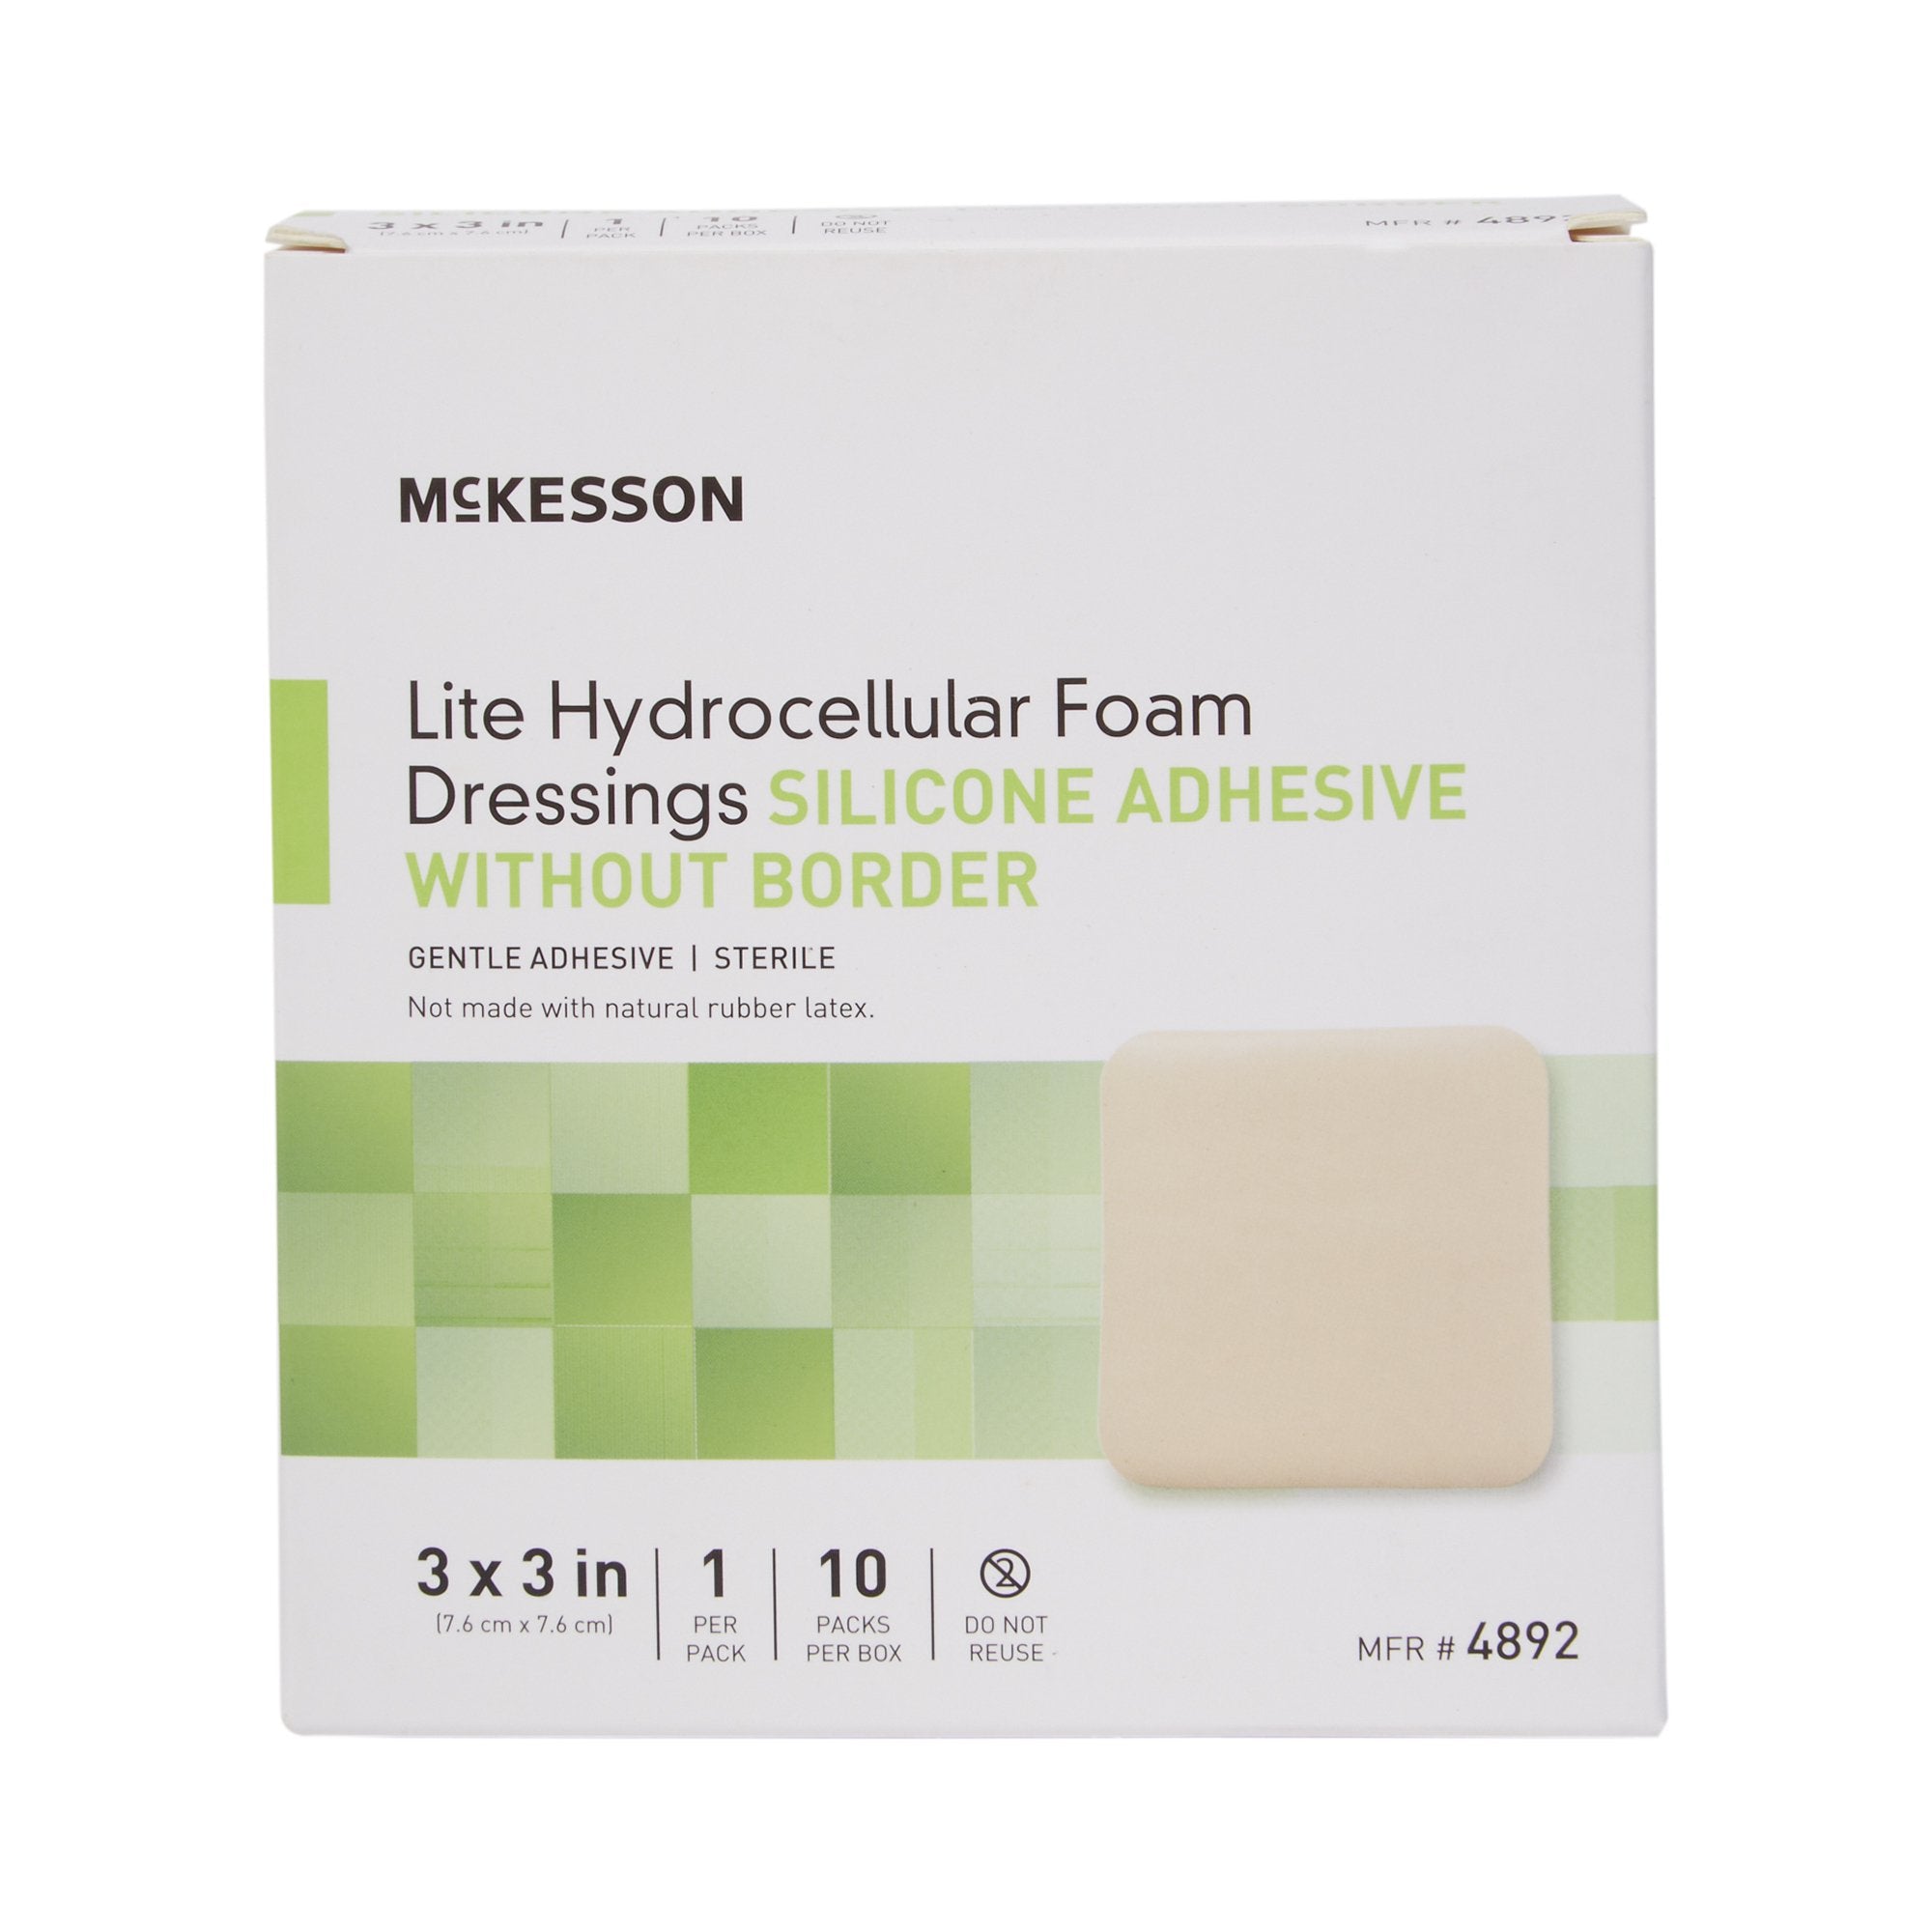 Thin Foam Dressing McKesson Lite 3 X 3 Inch Without Border Film Backing Silicone Gel Adhesive Square Sterile